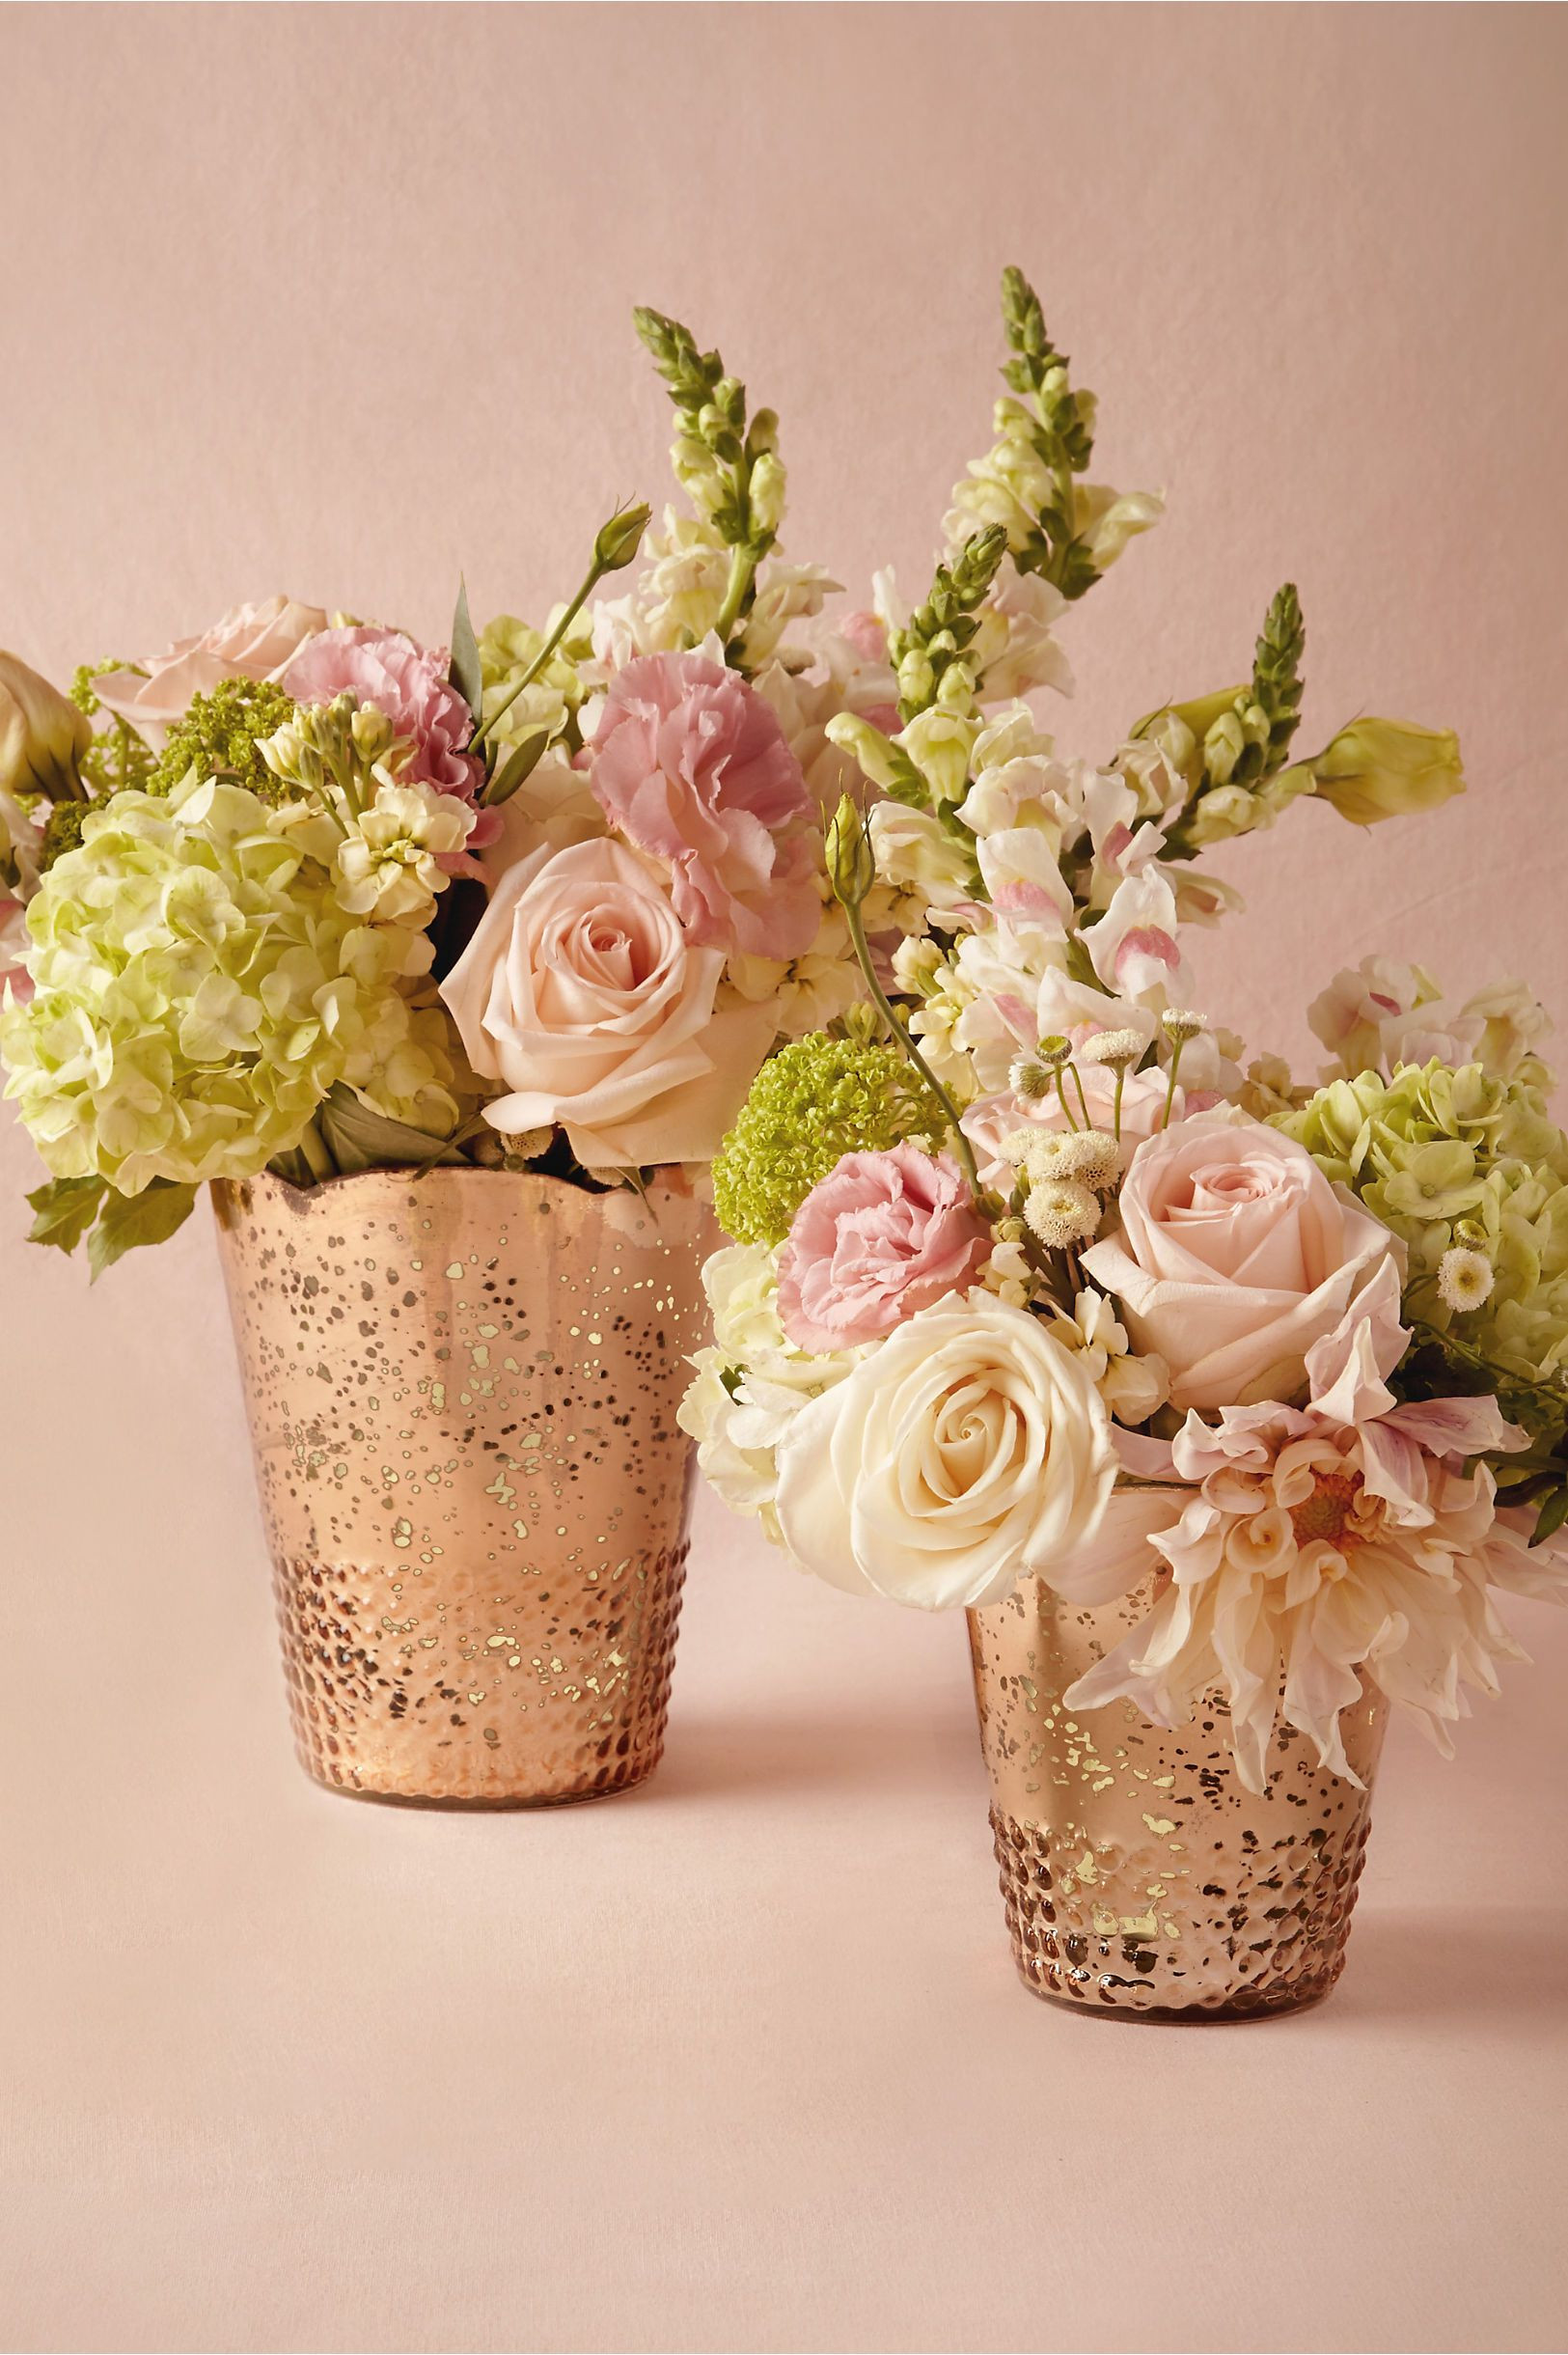 Gold Wedding Flowers
 5 Ways to Bring Your Rose Gold Wedding to Life in 2019